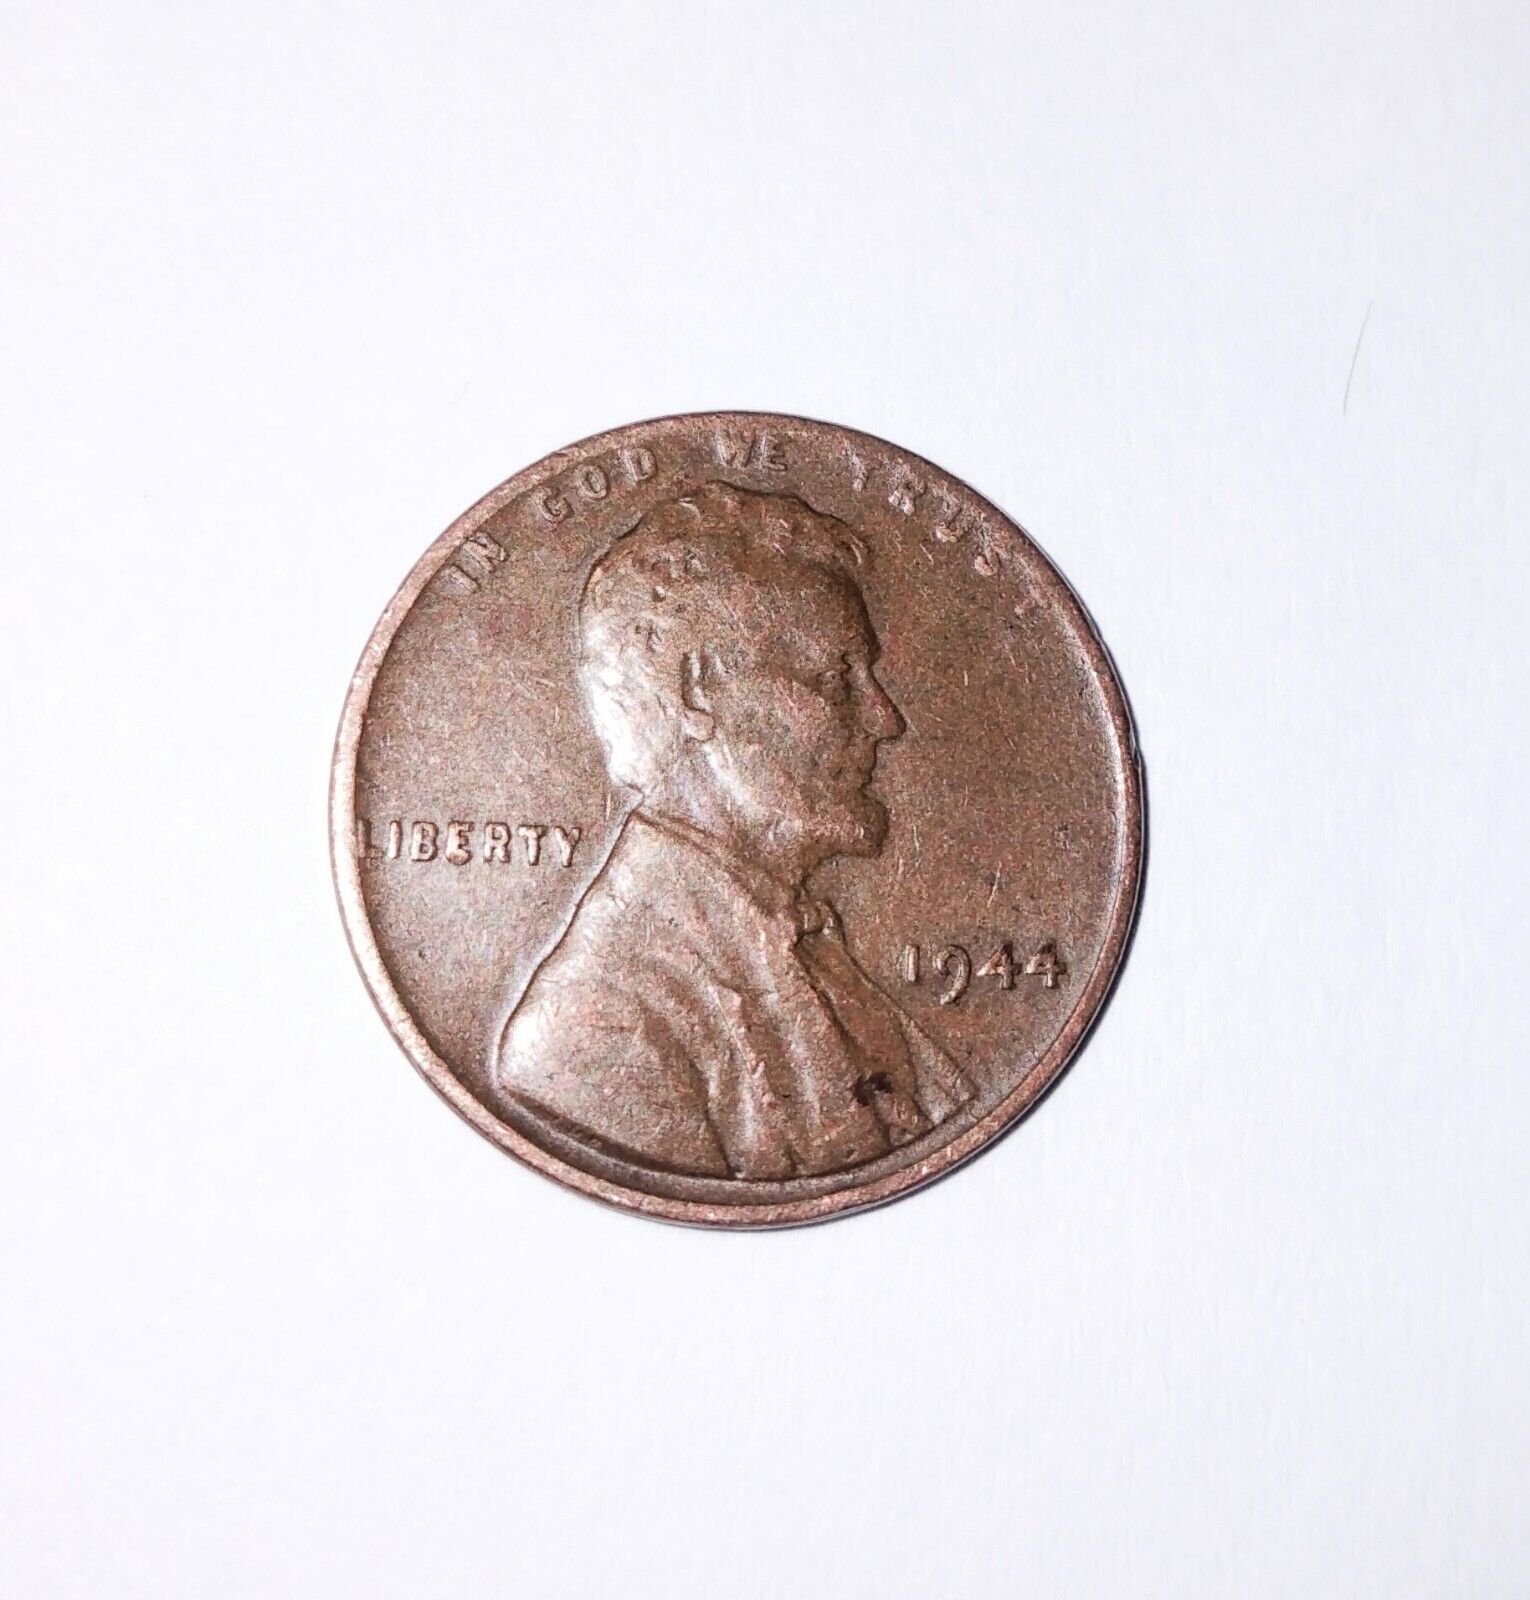 RARE 1944 Wheat Penny with NO Mint Mark and  “L\